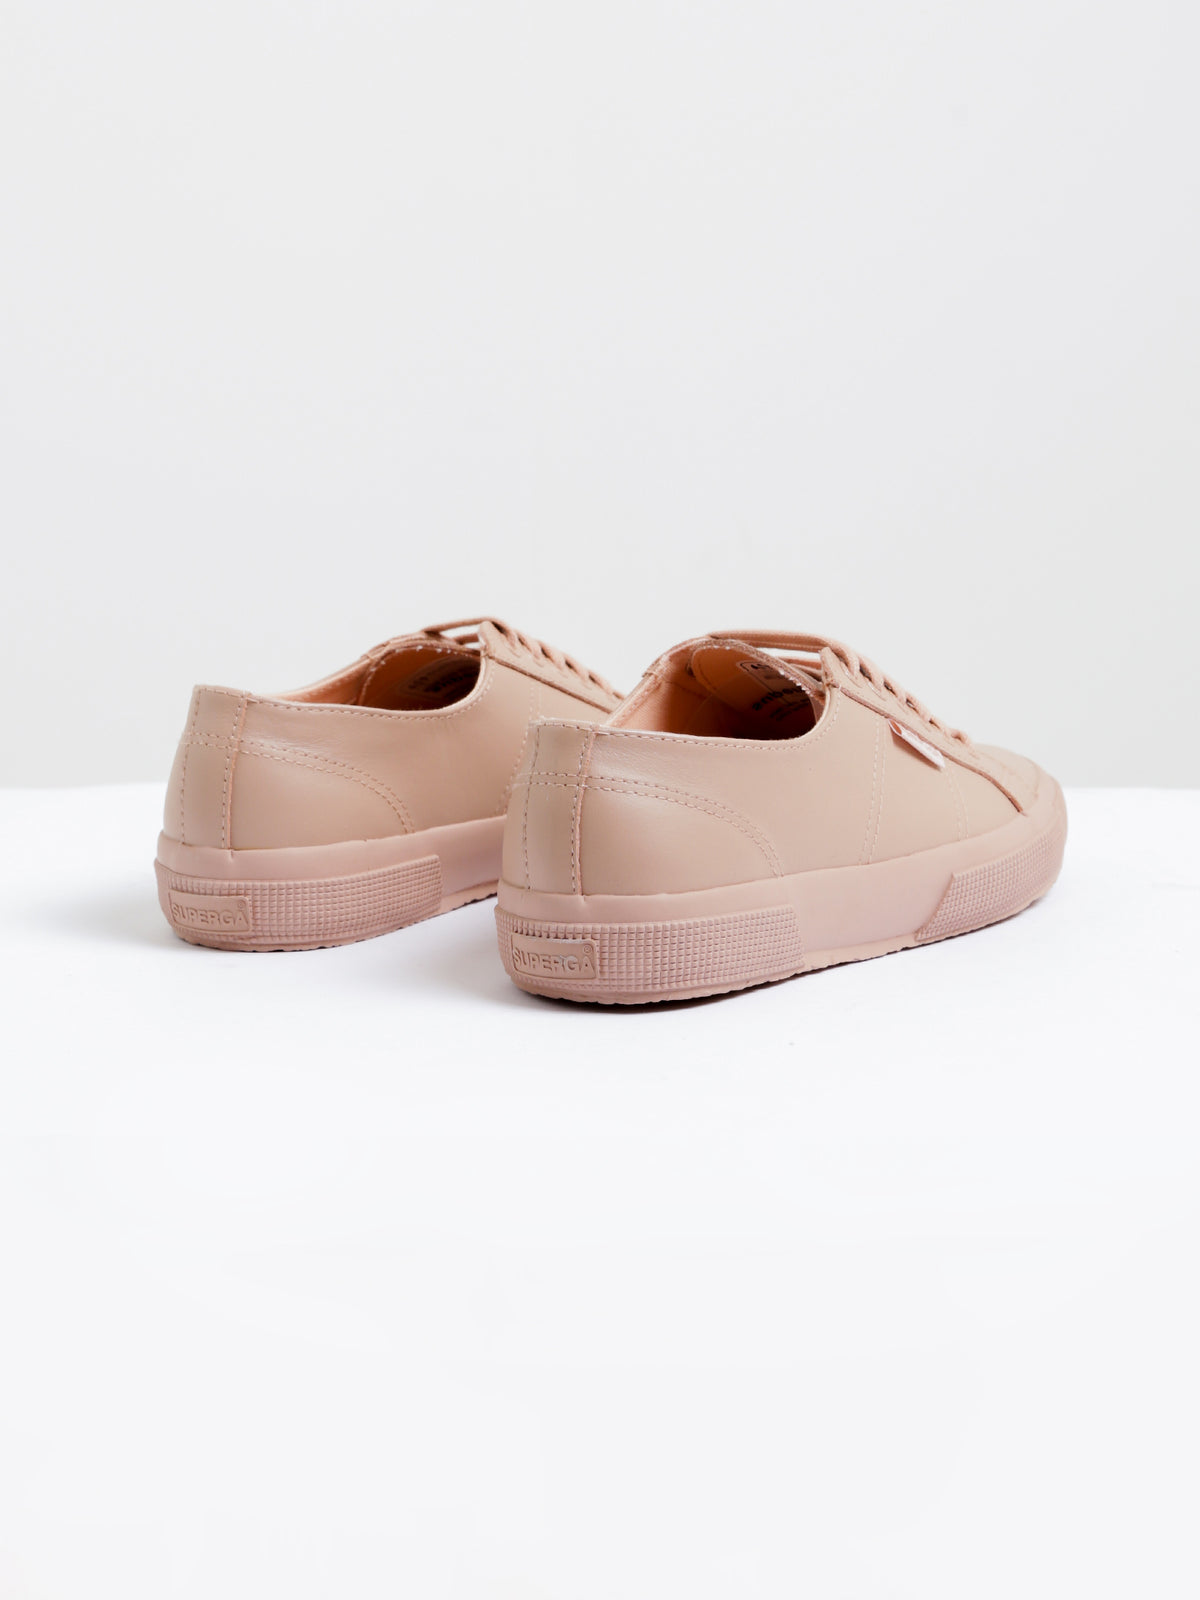 Womens 2750 FGLU Sneakers in Pink Leather